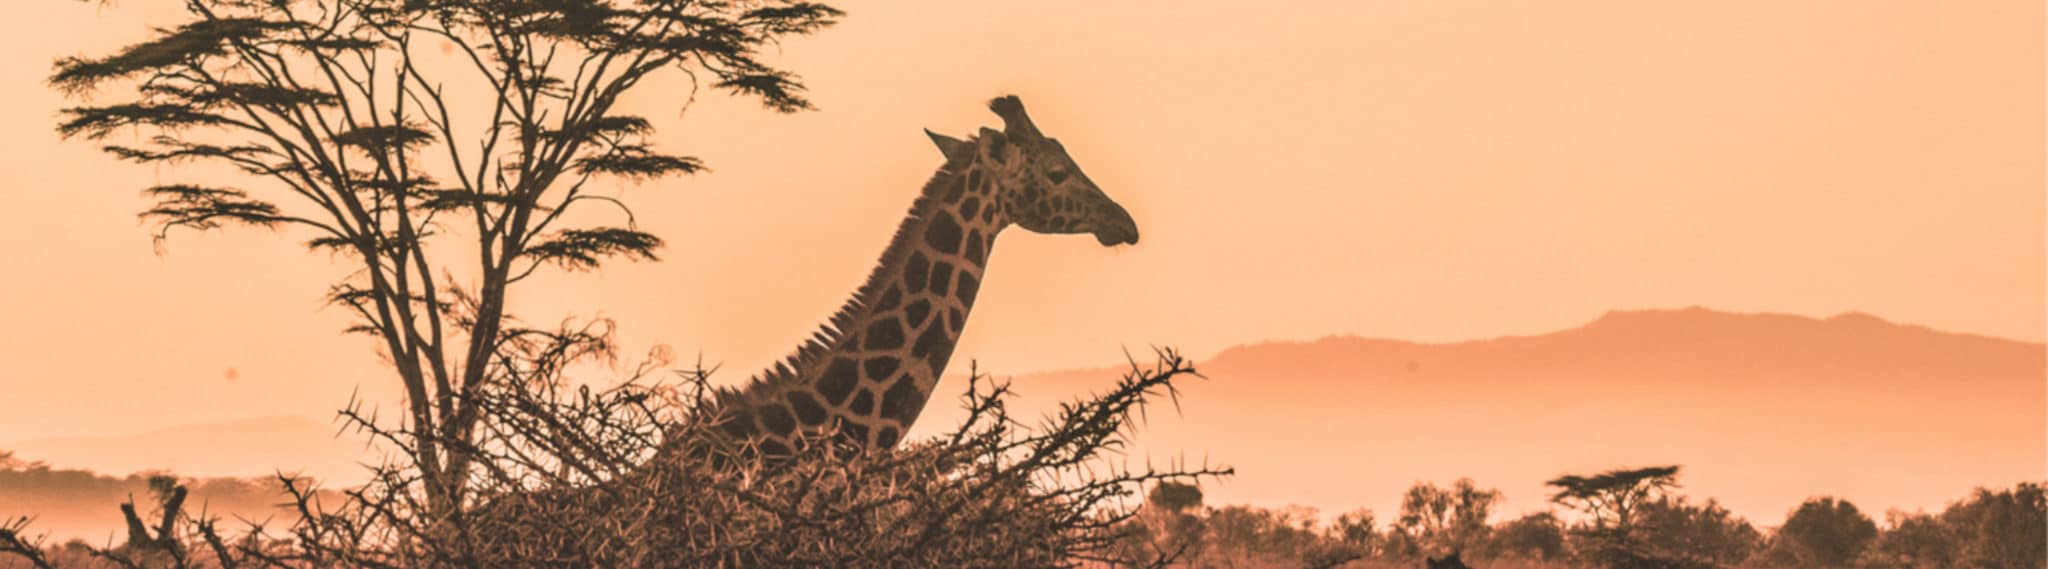 The magnificent African giraffe is now an endangered species